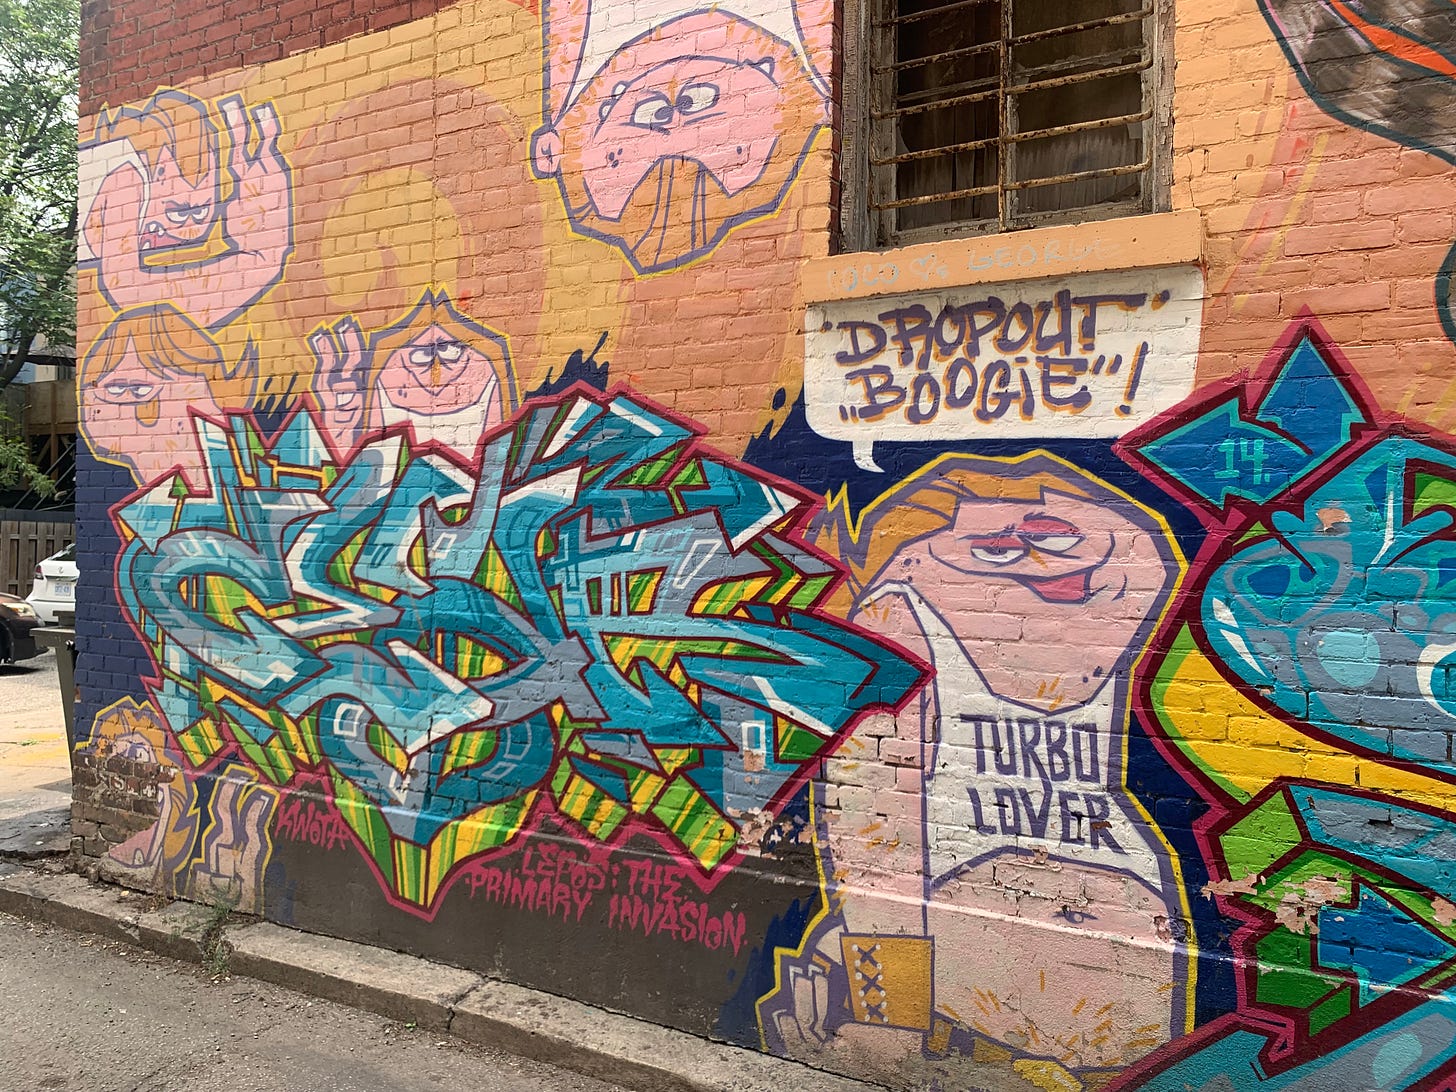 Graffiti art with blue lettering with pink outlines and the signature "KWOTA," ith cartoon characters of white men in tank tops, one of which says "TURBO LOVER" on the front.